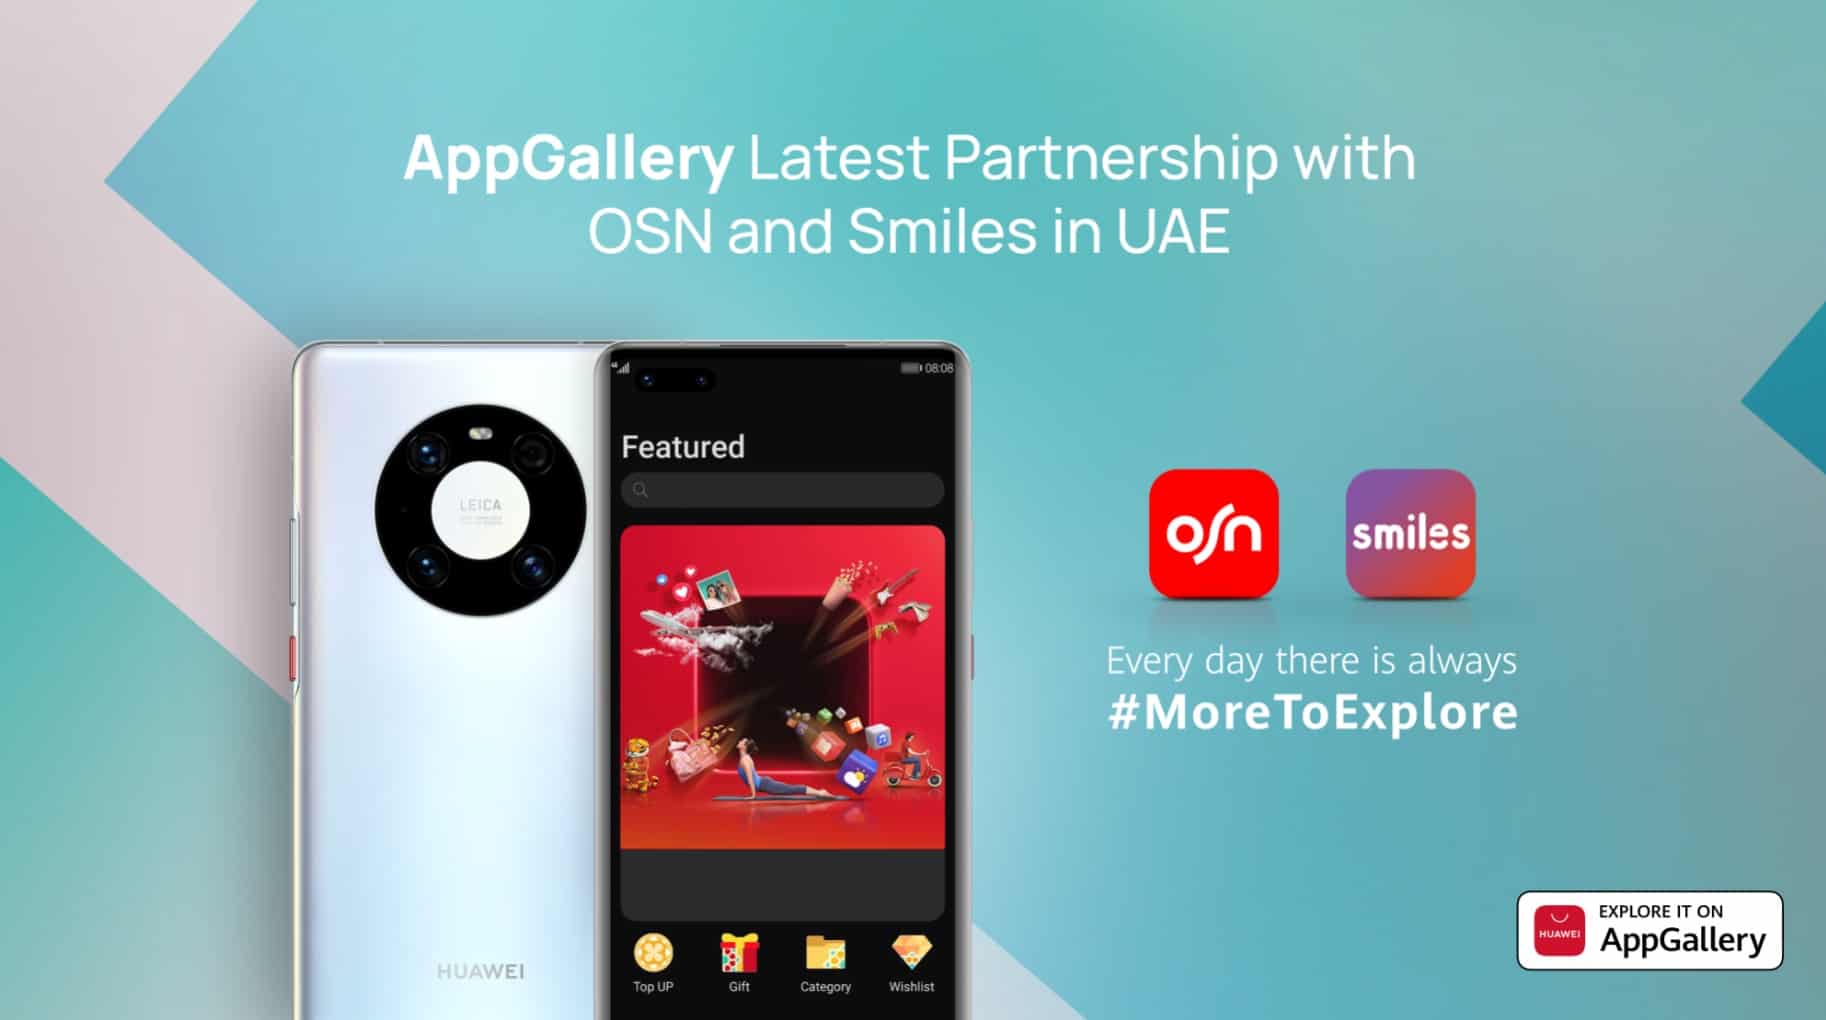 AppGallery launches a co-branded campaign with OSN and Smiles among UAE users